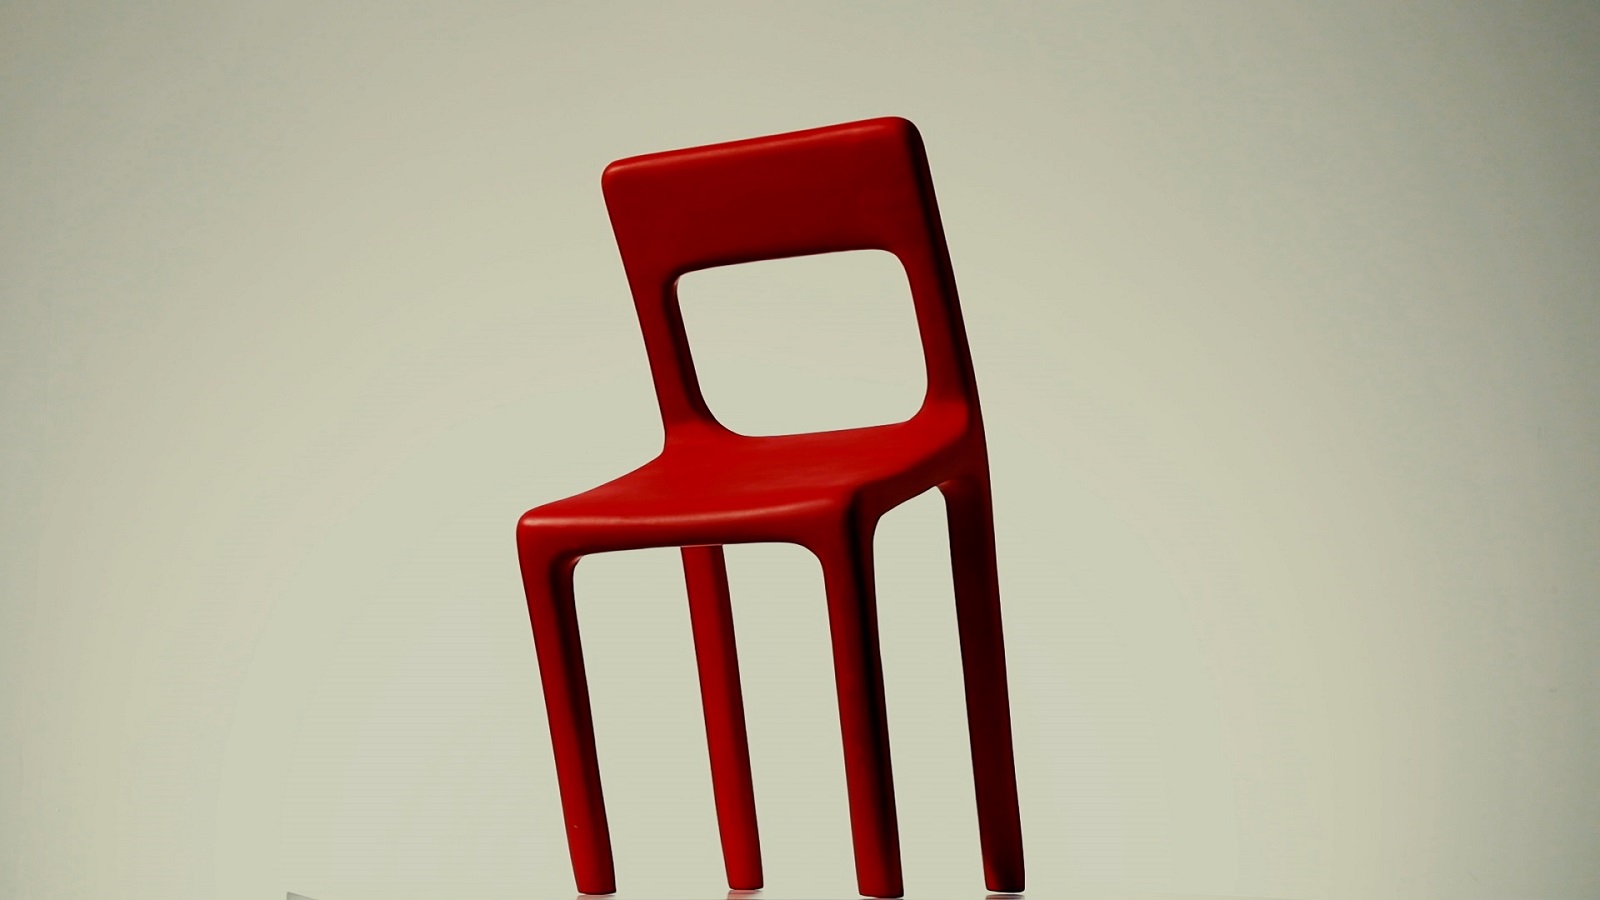 Uncomfortable Objects Designed to Spur People’s Empathy